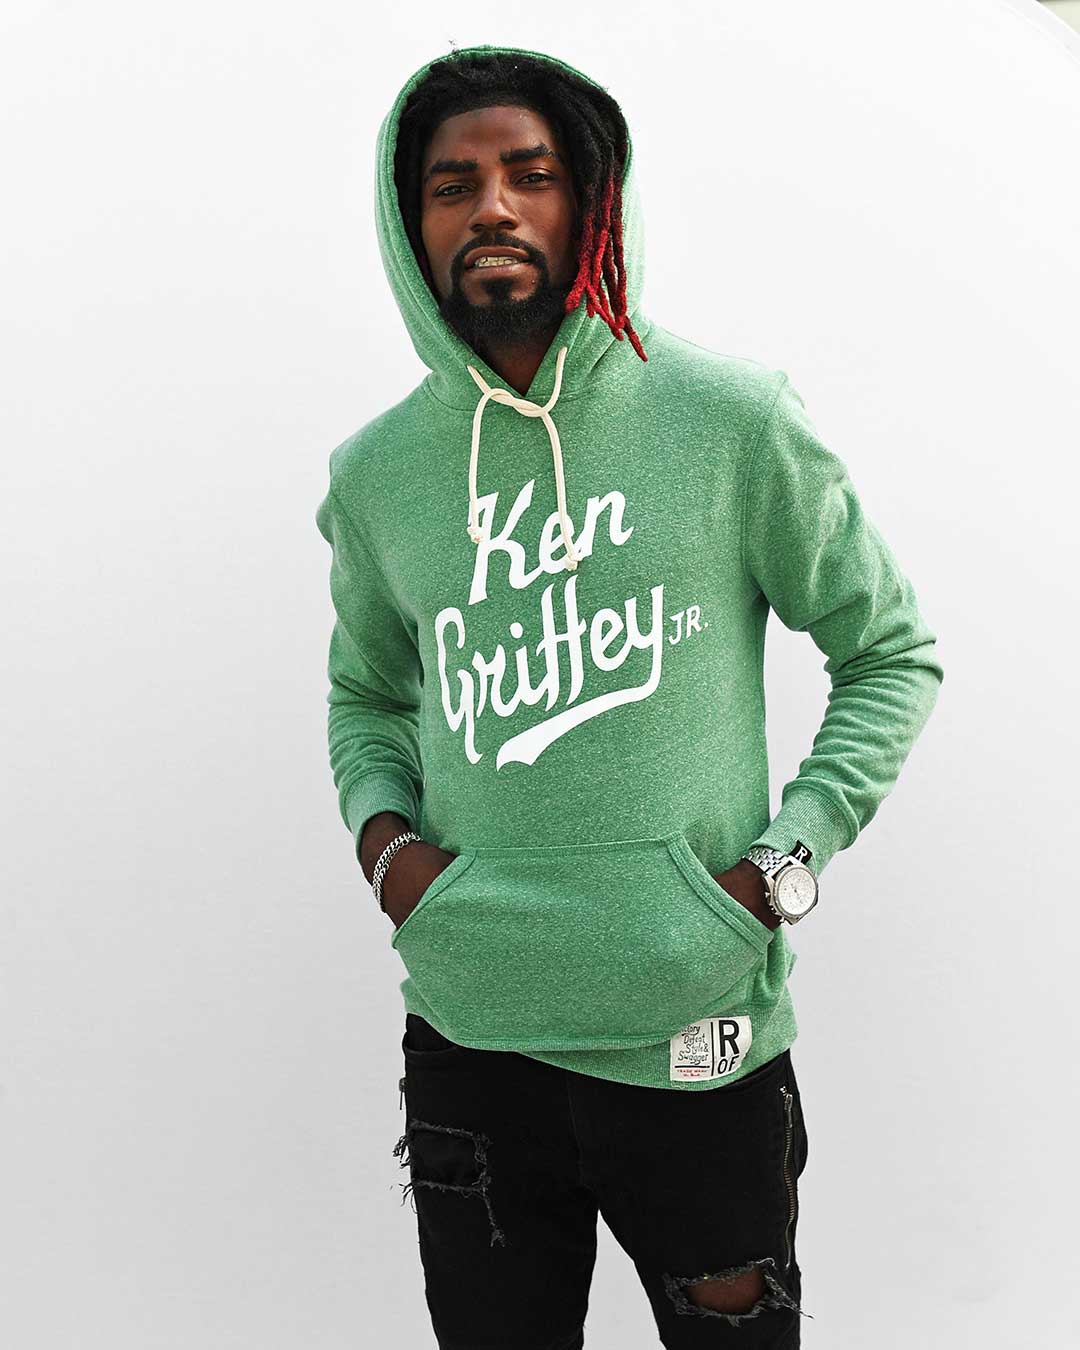 Ken Griffey Jr. 13x All Star Green PO Hoody - Roots of Fight Canada